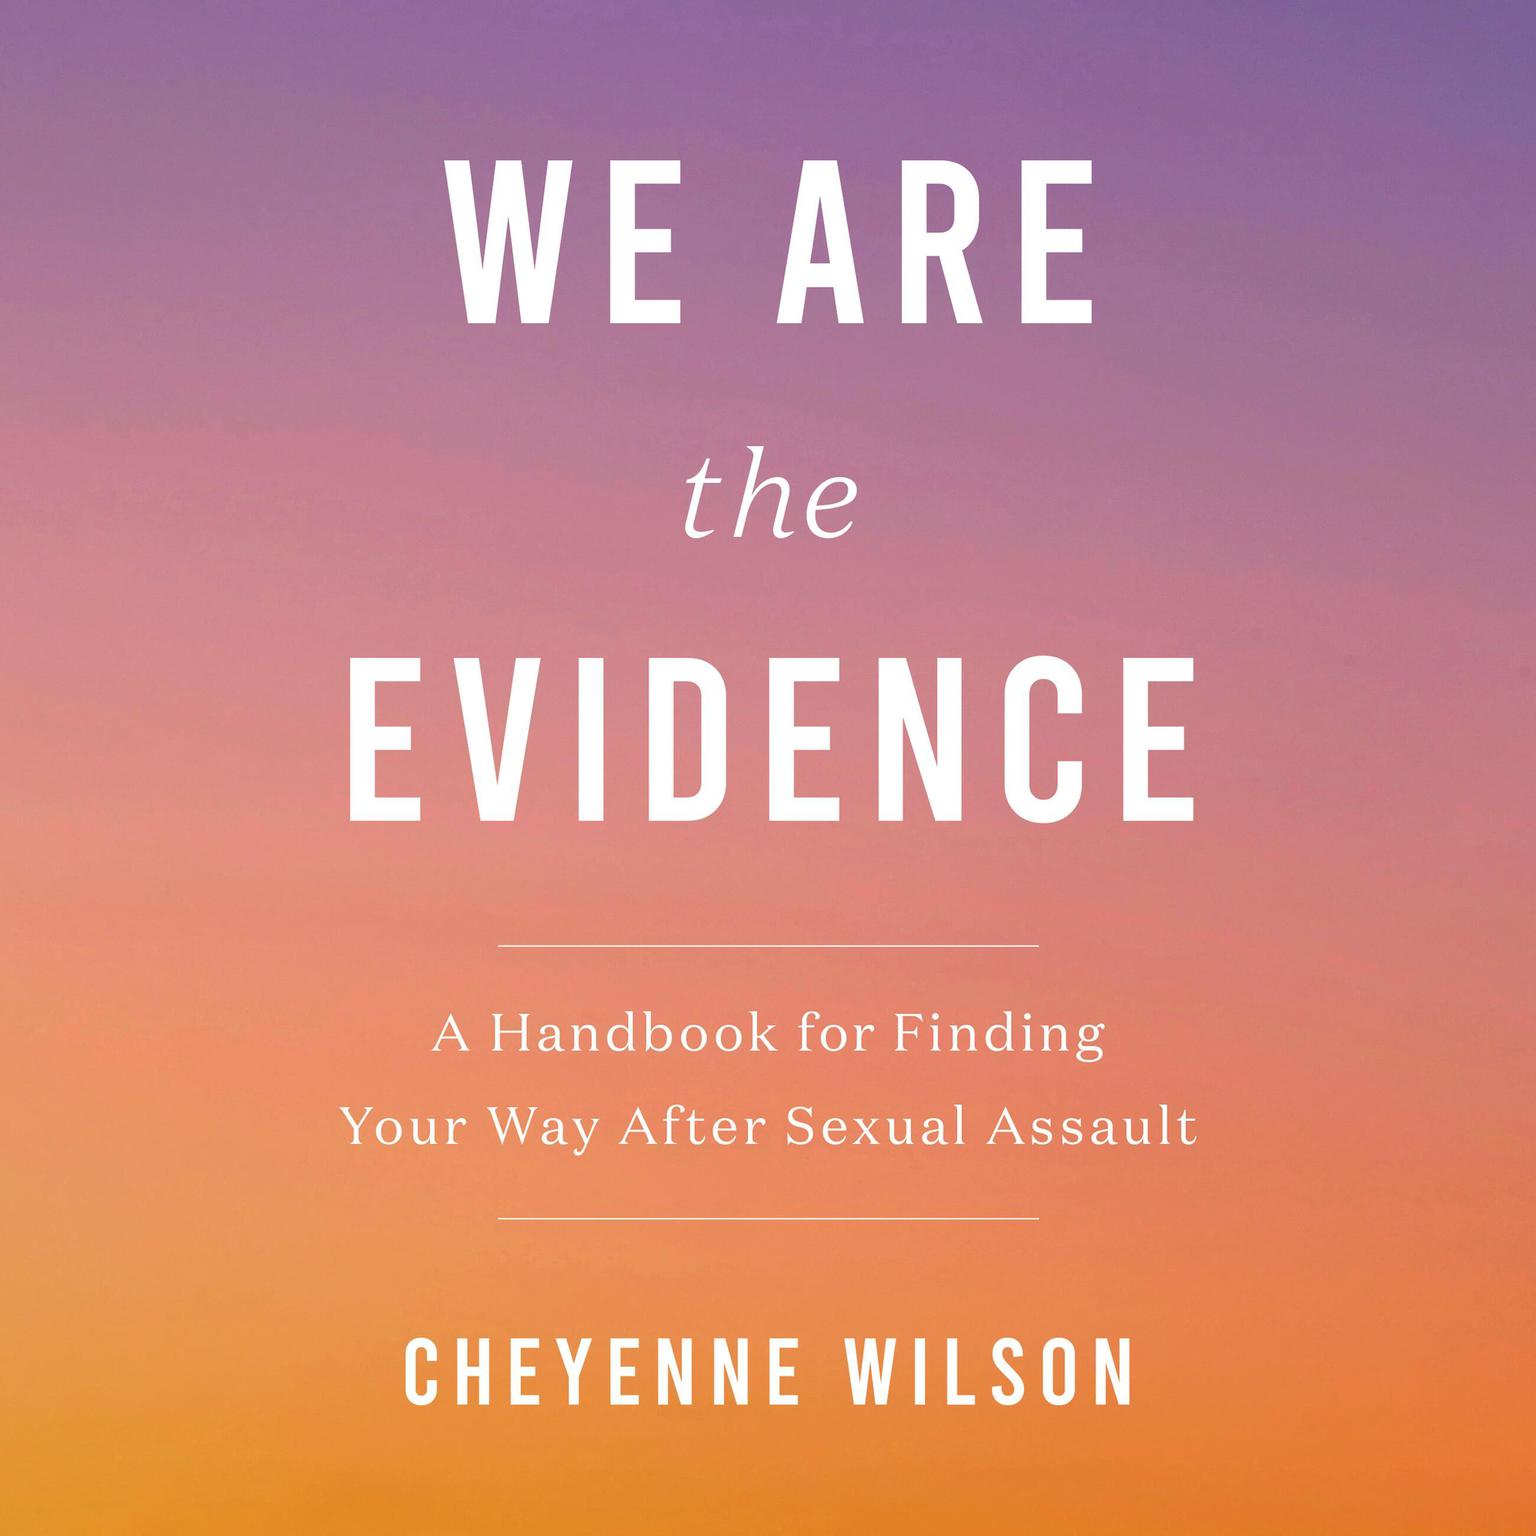 We Are the Evidence: A Handbook for Finding Your Way After Sexual Assault Audiobook, by Cheyenne Wilson